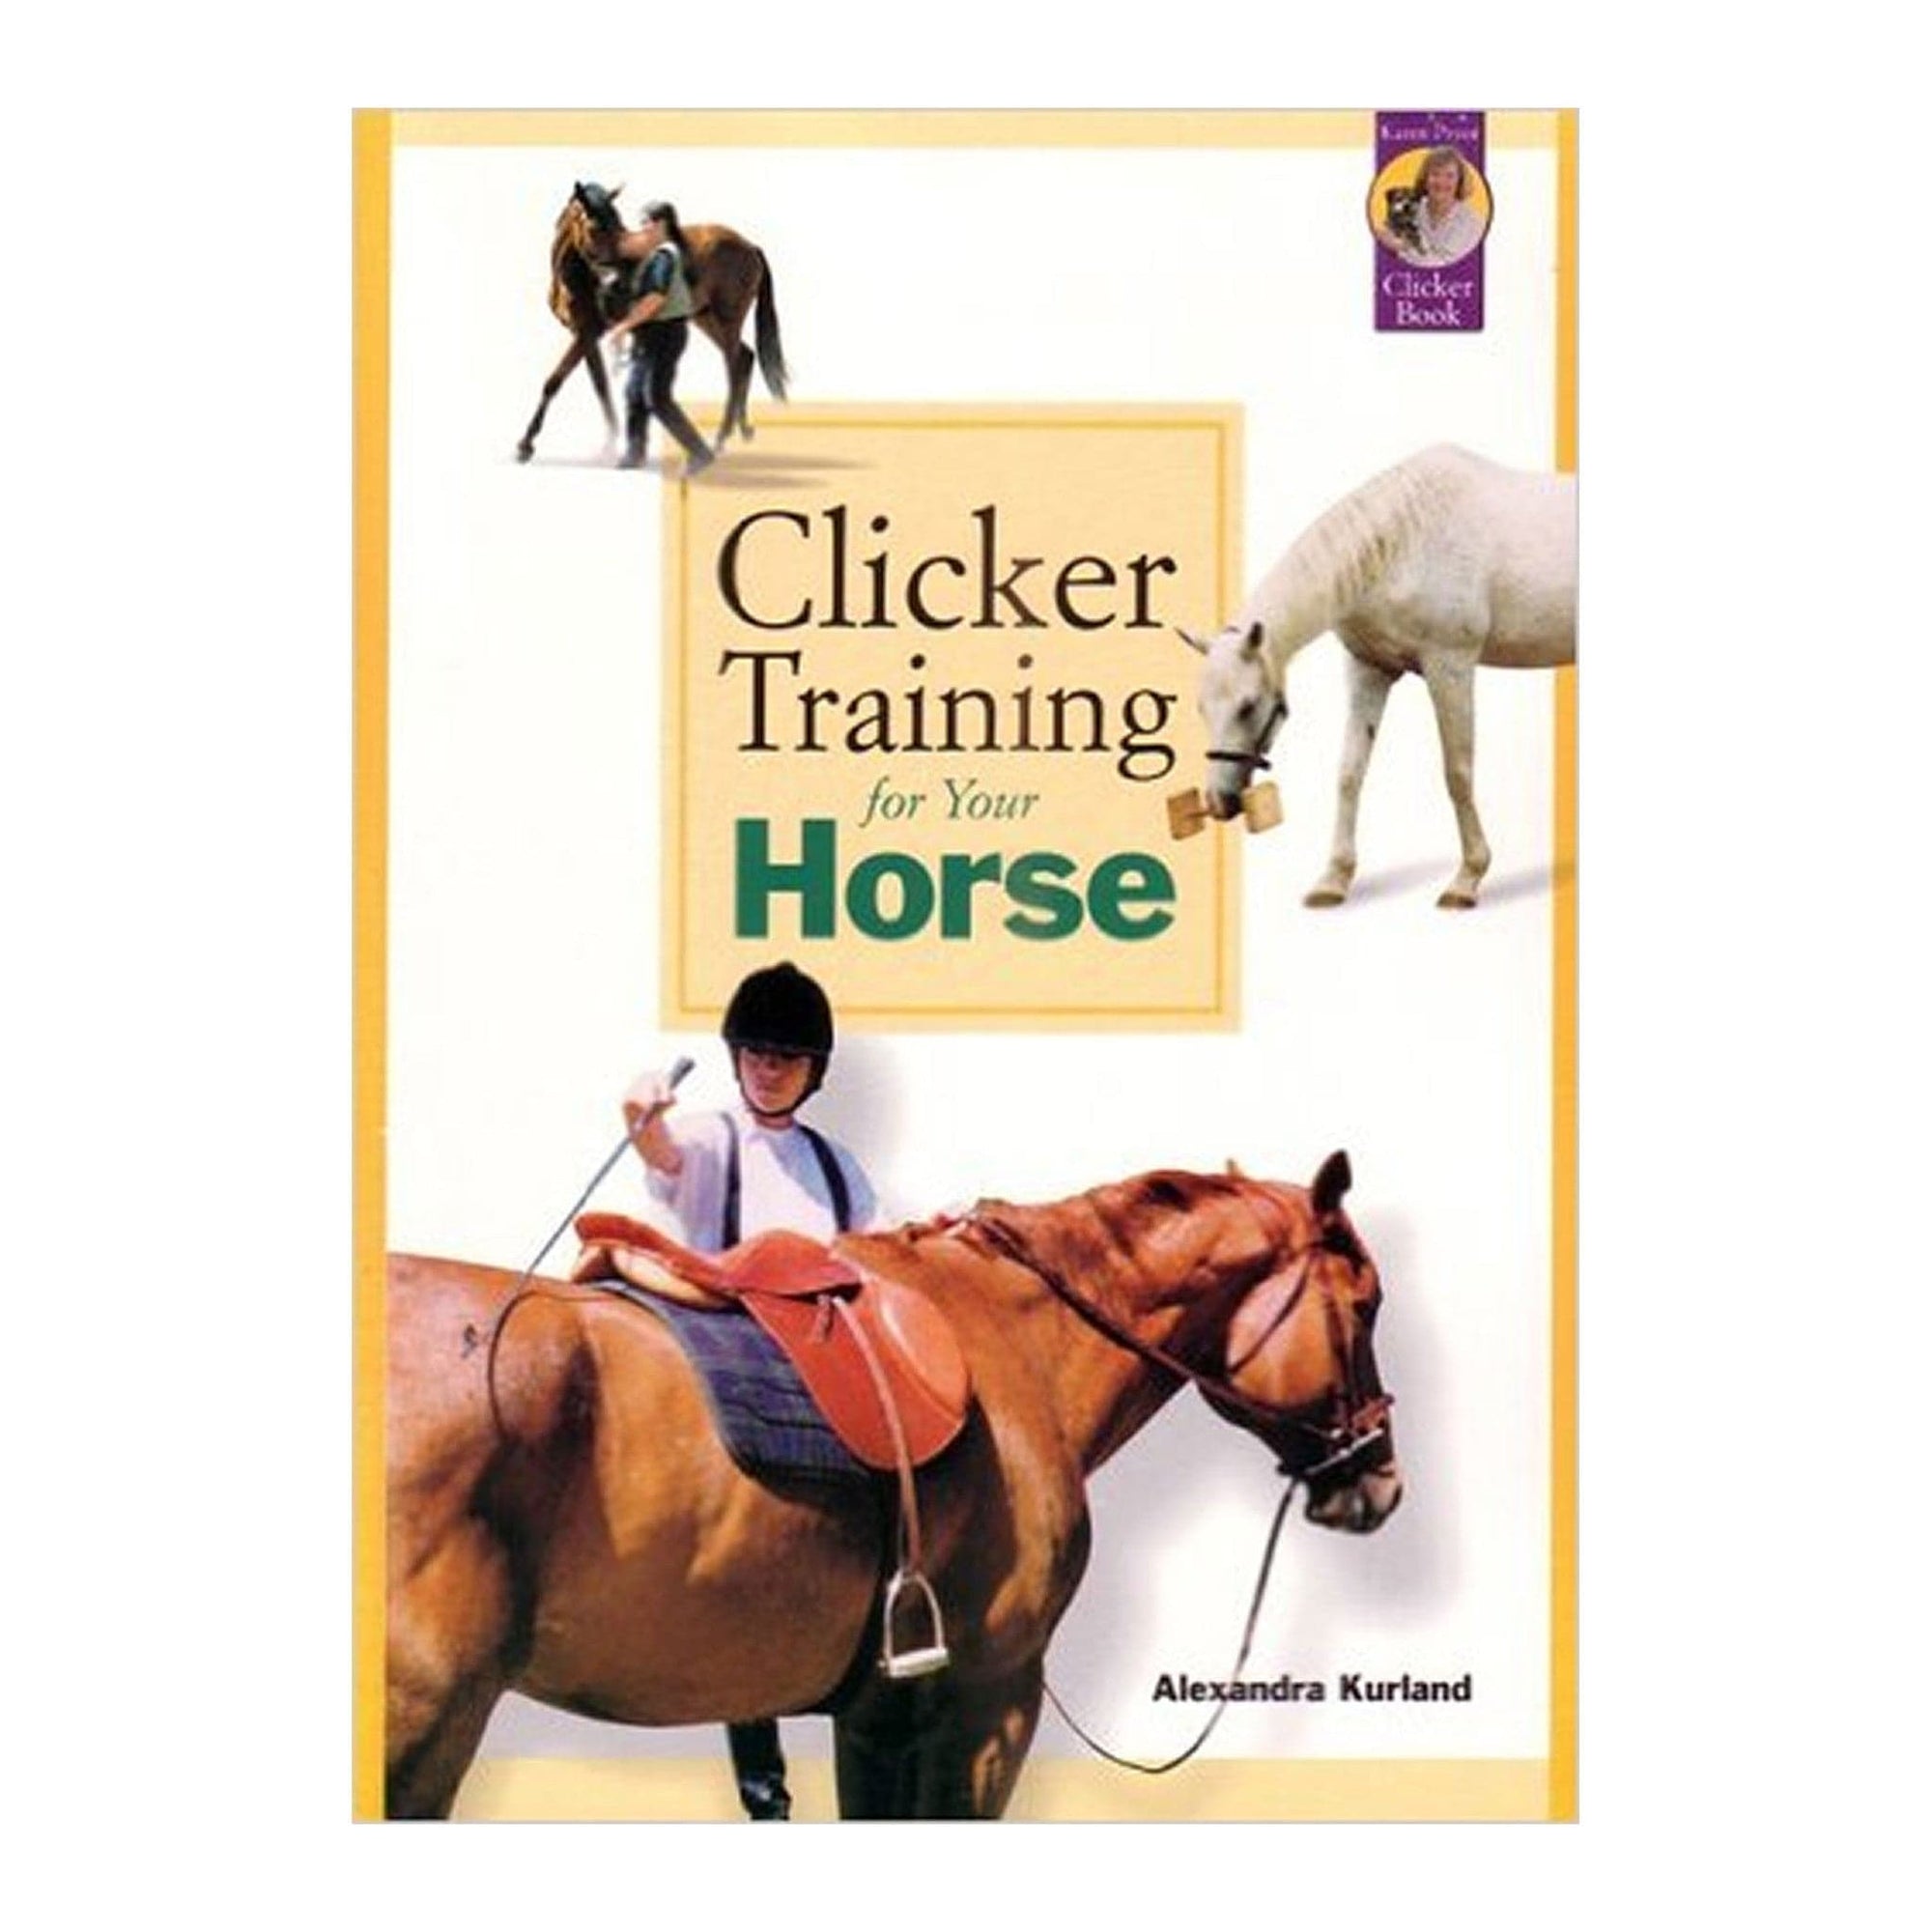 Clicker Training for Your Horse by Alexandra Kurland